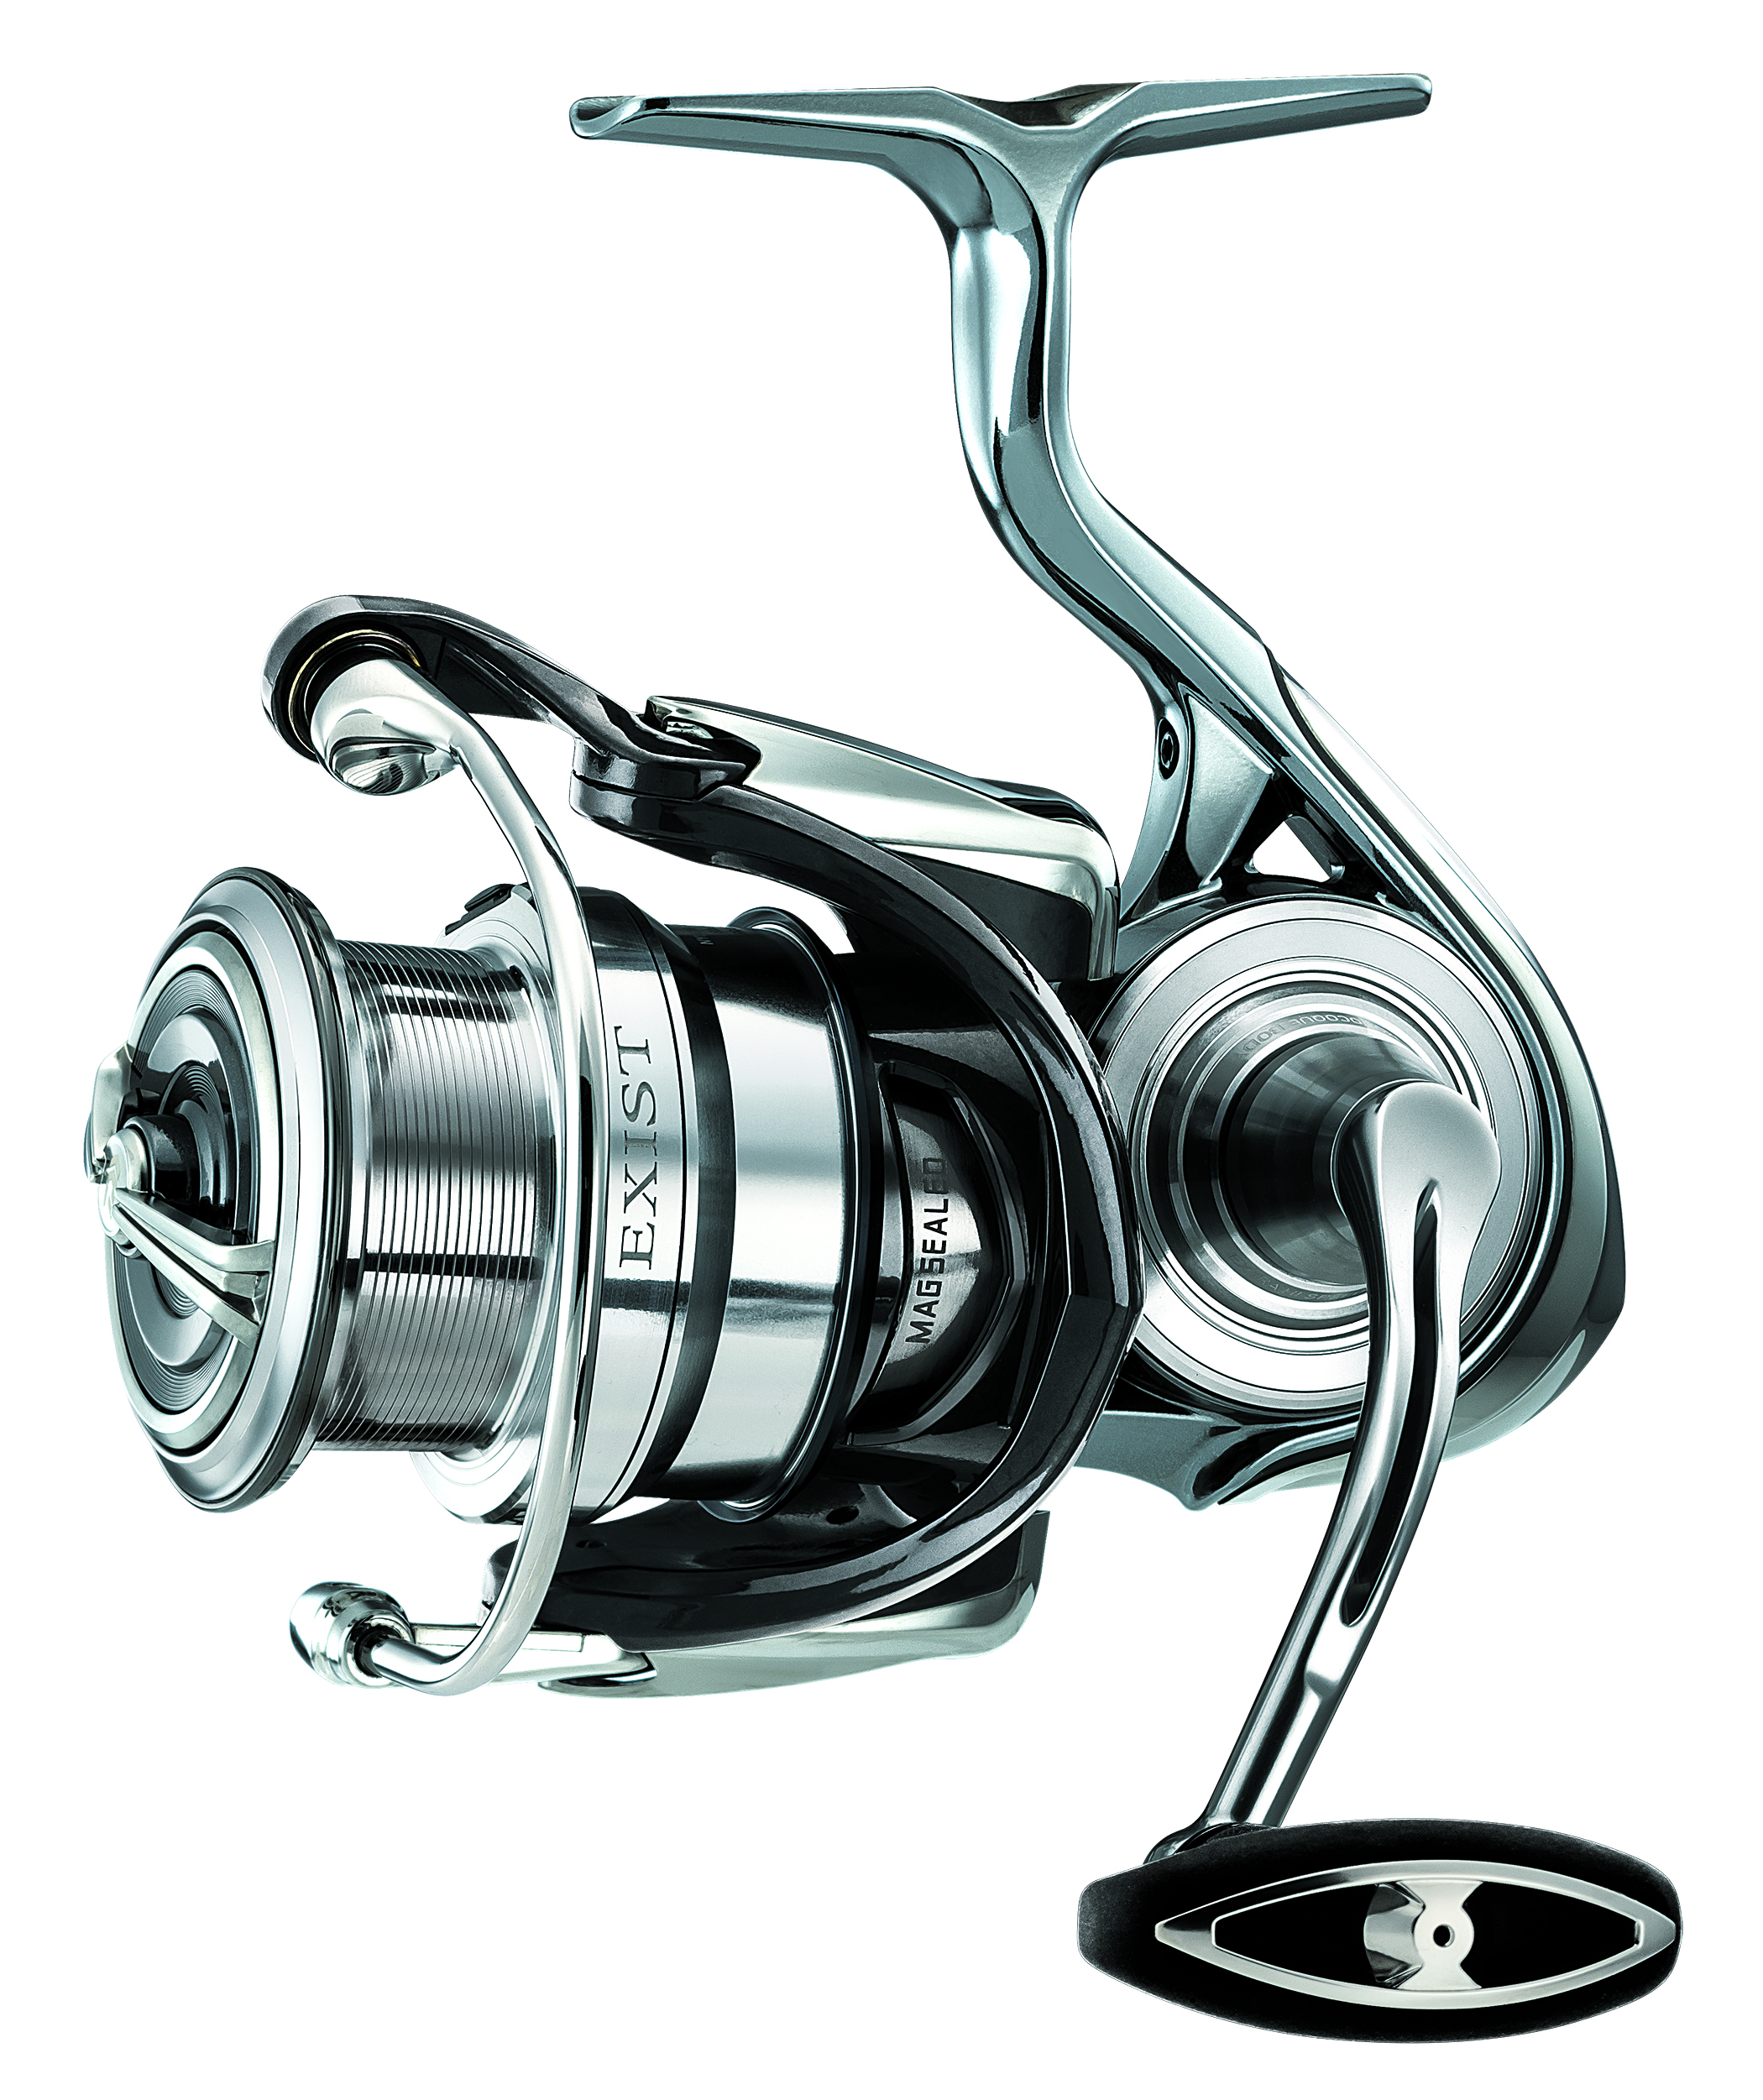 DAIWA: The World's Finest Spinning Reel